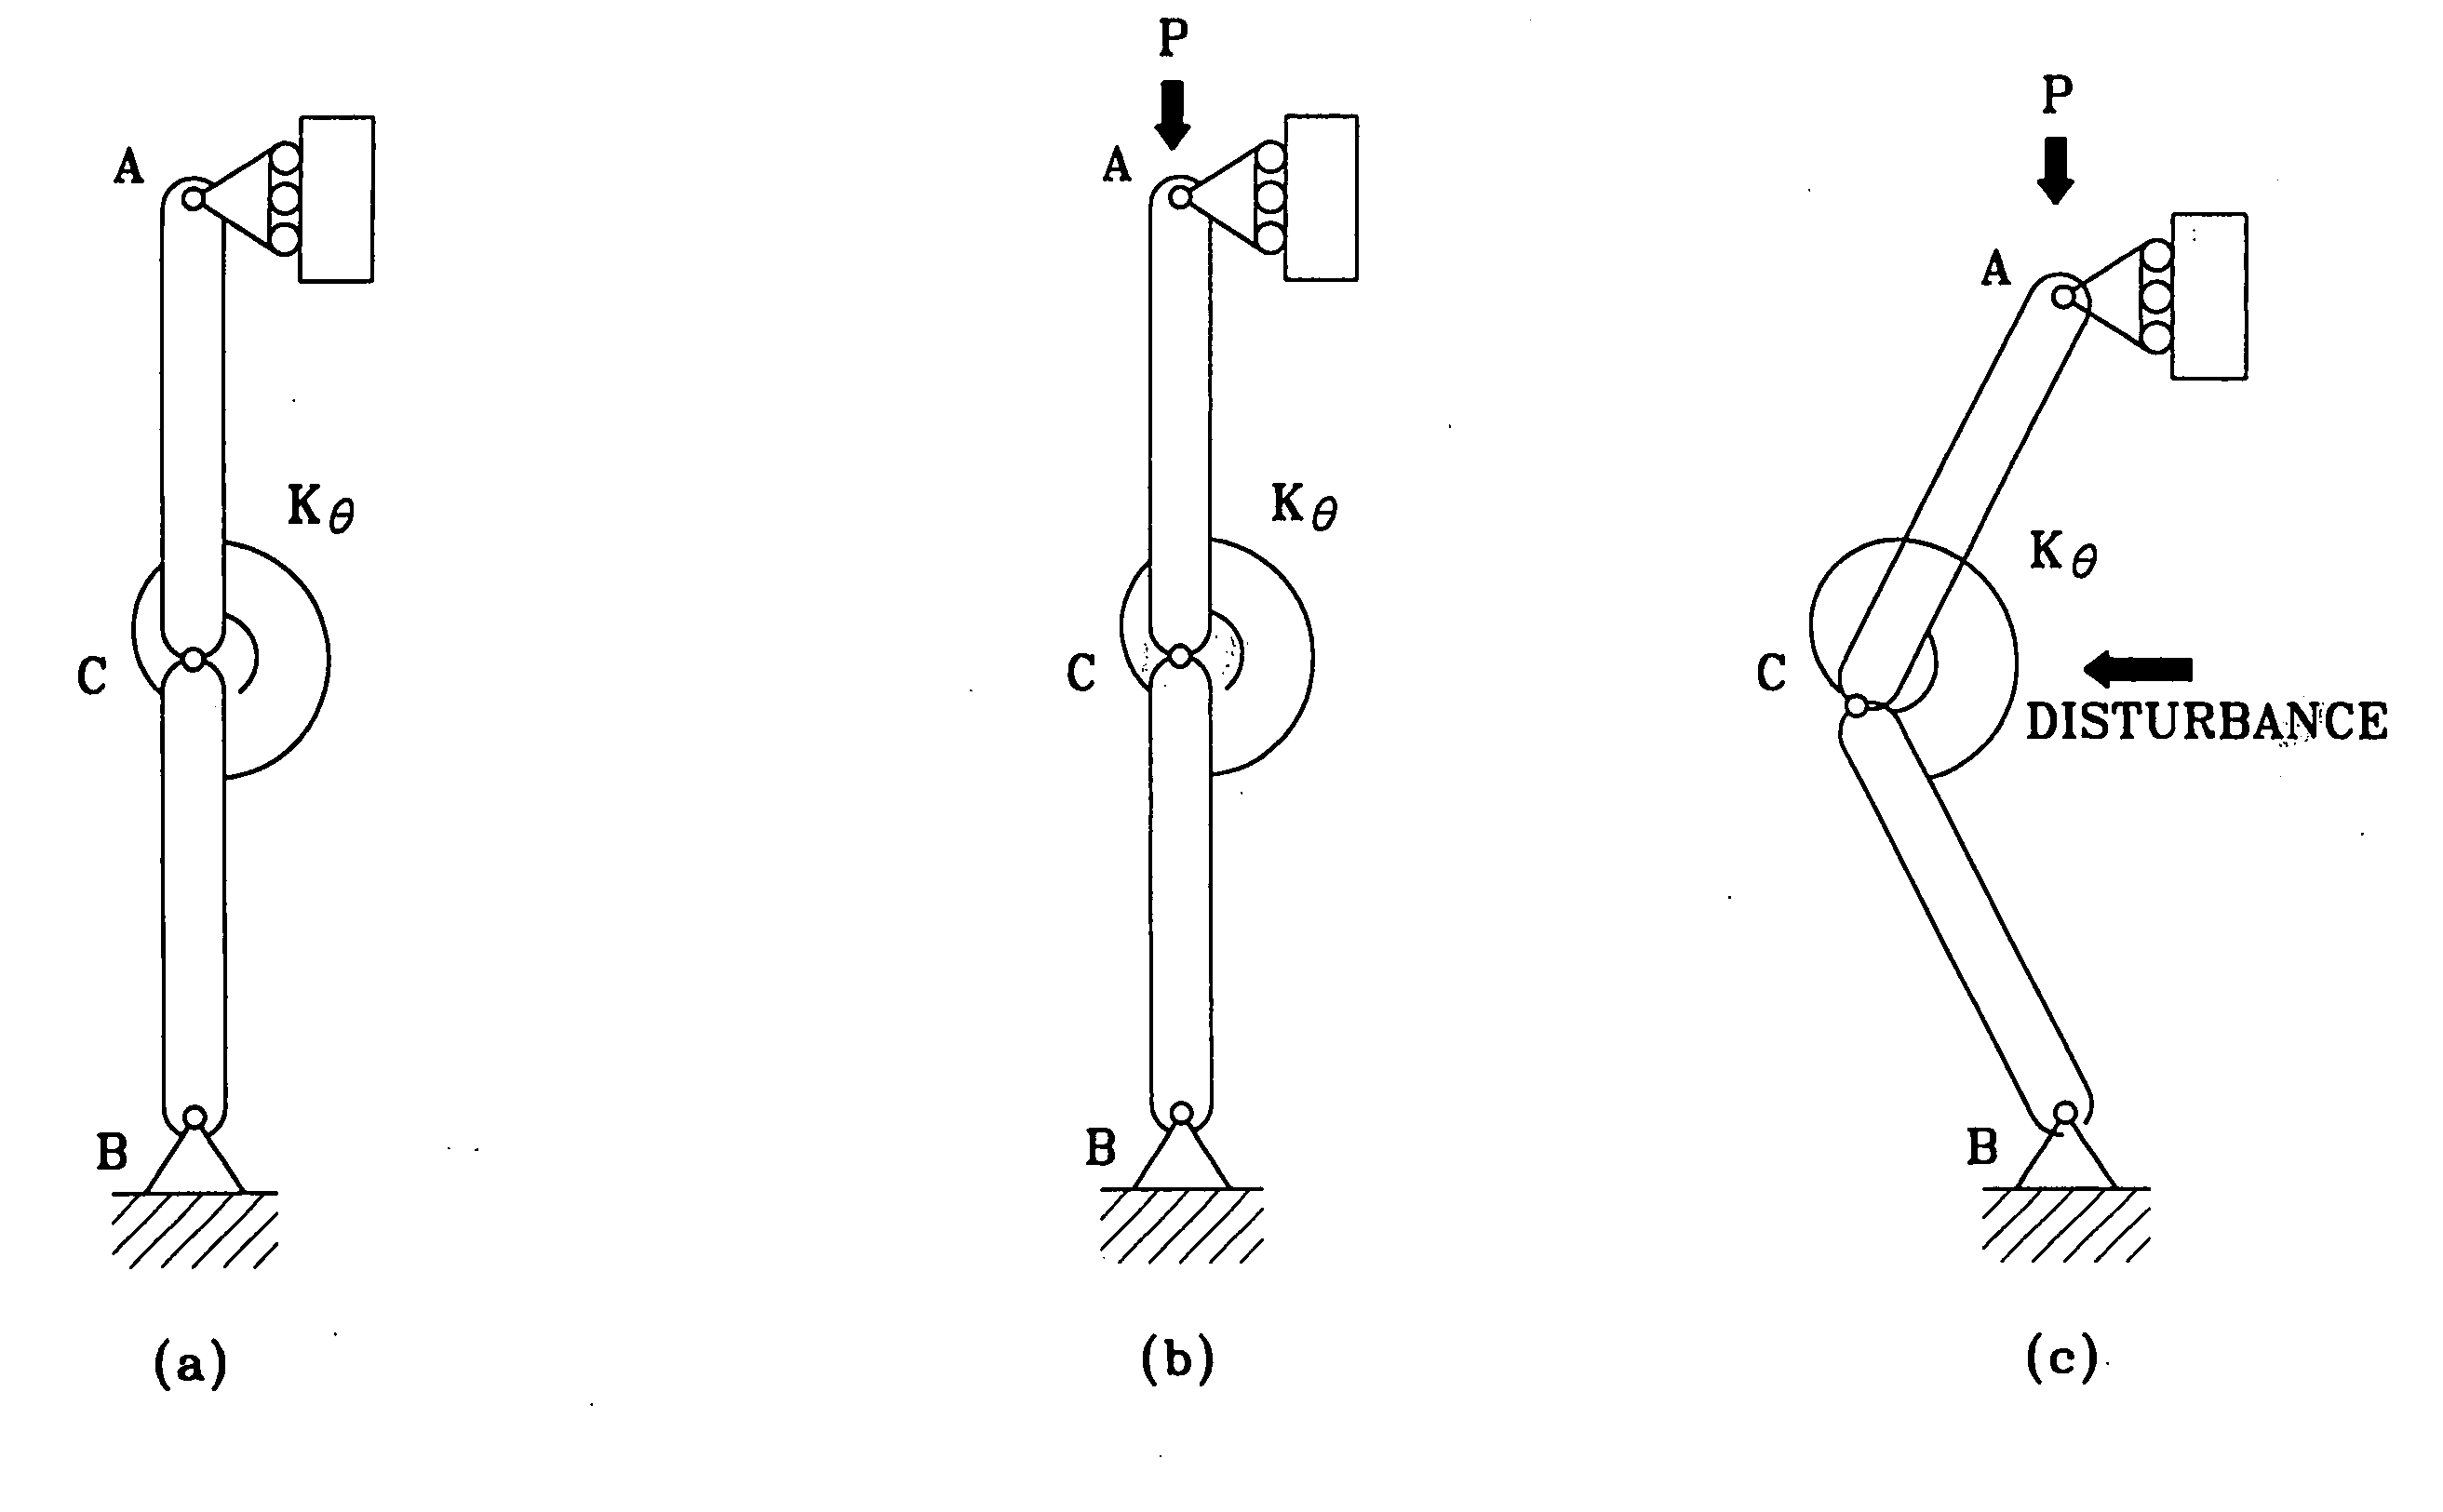 Immediate buckling model, hysteresis model, and cloth simulation method based on the invented models, and computer-readable media storing a program which executes the invented simulation method